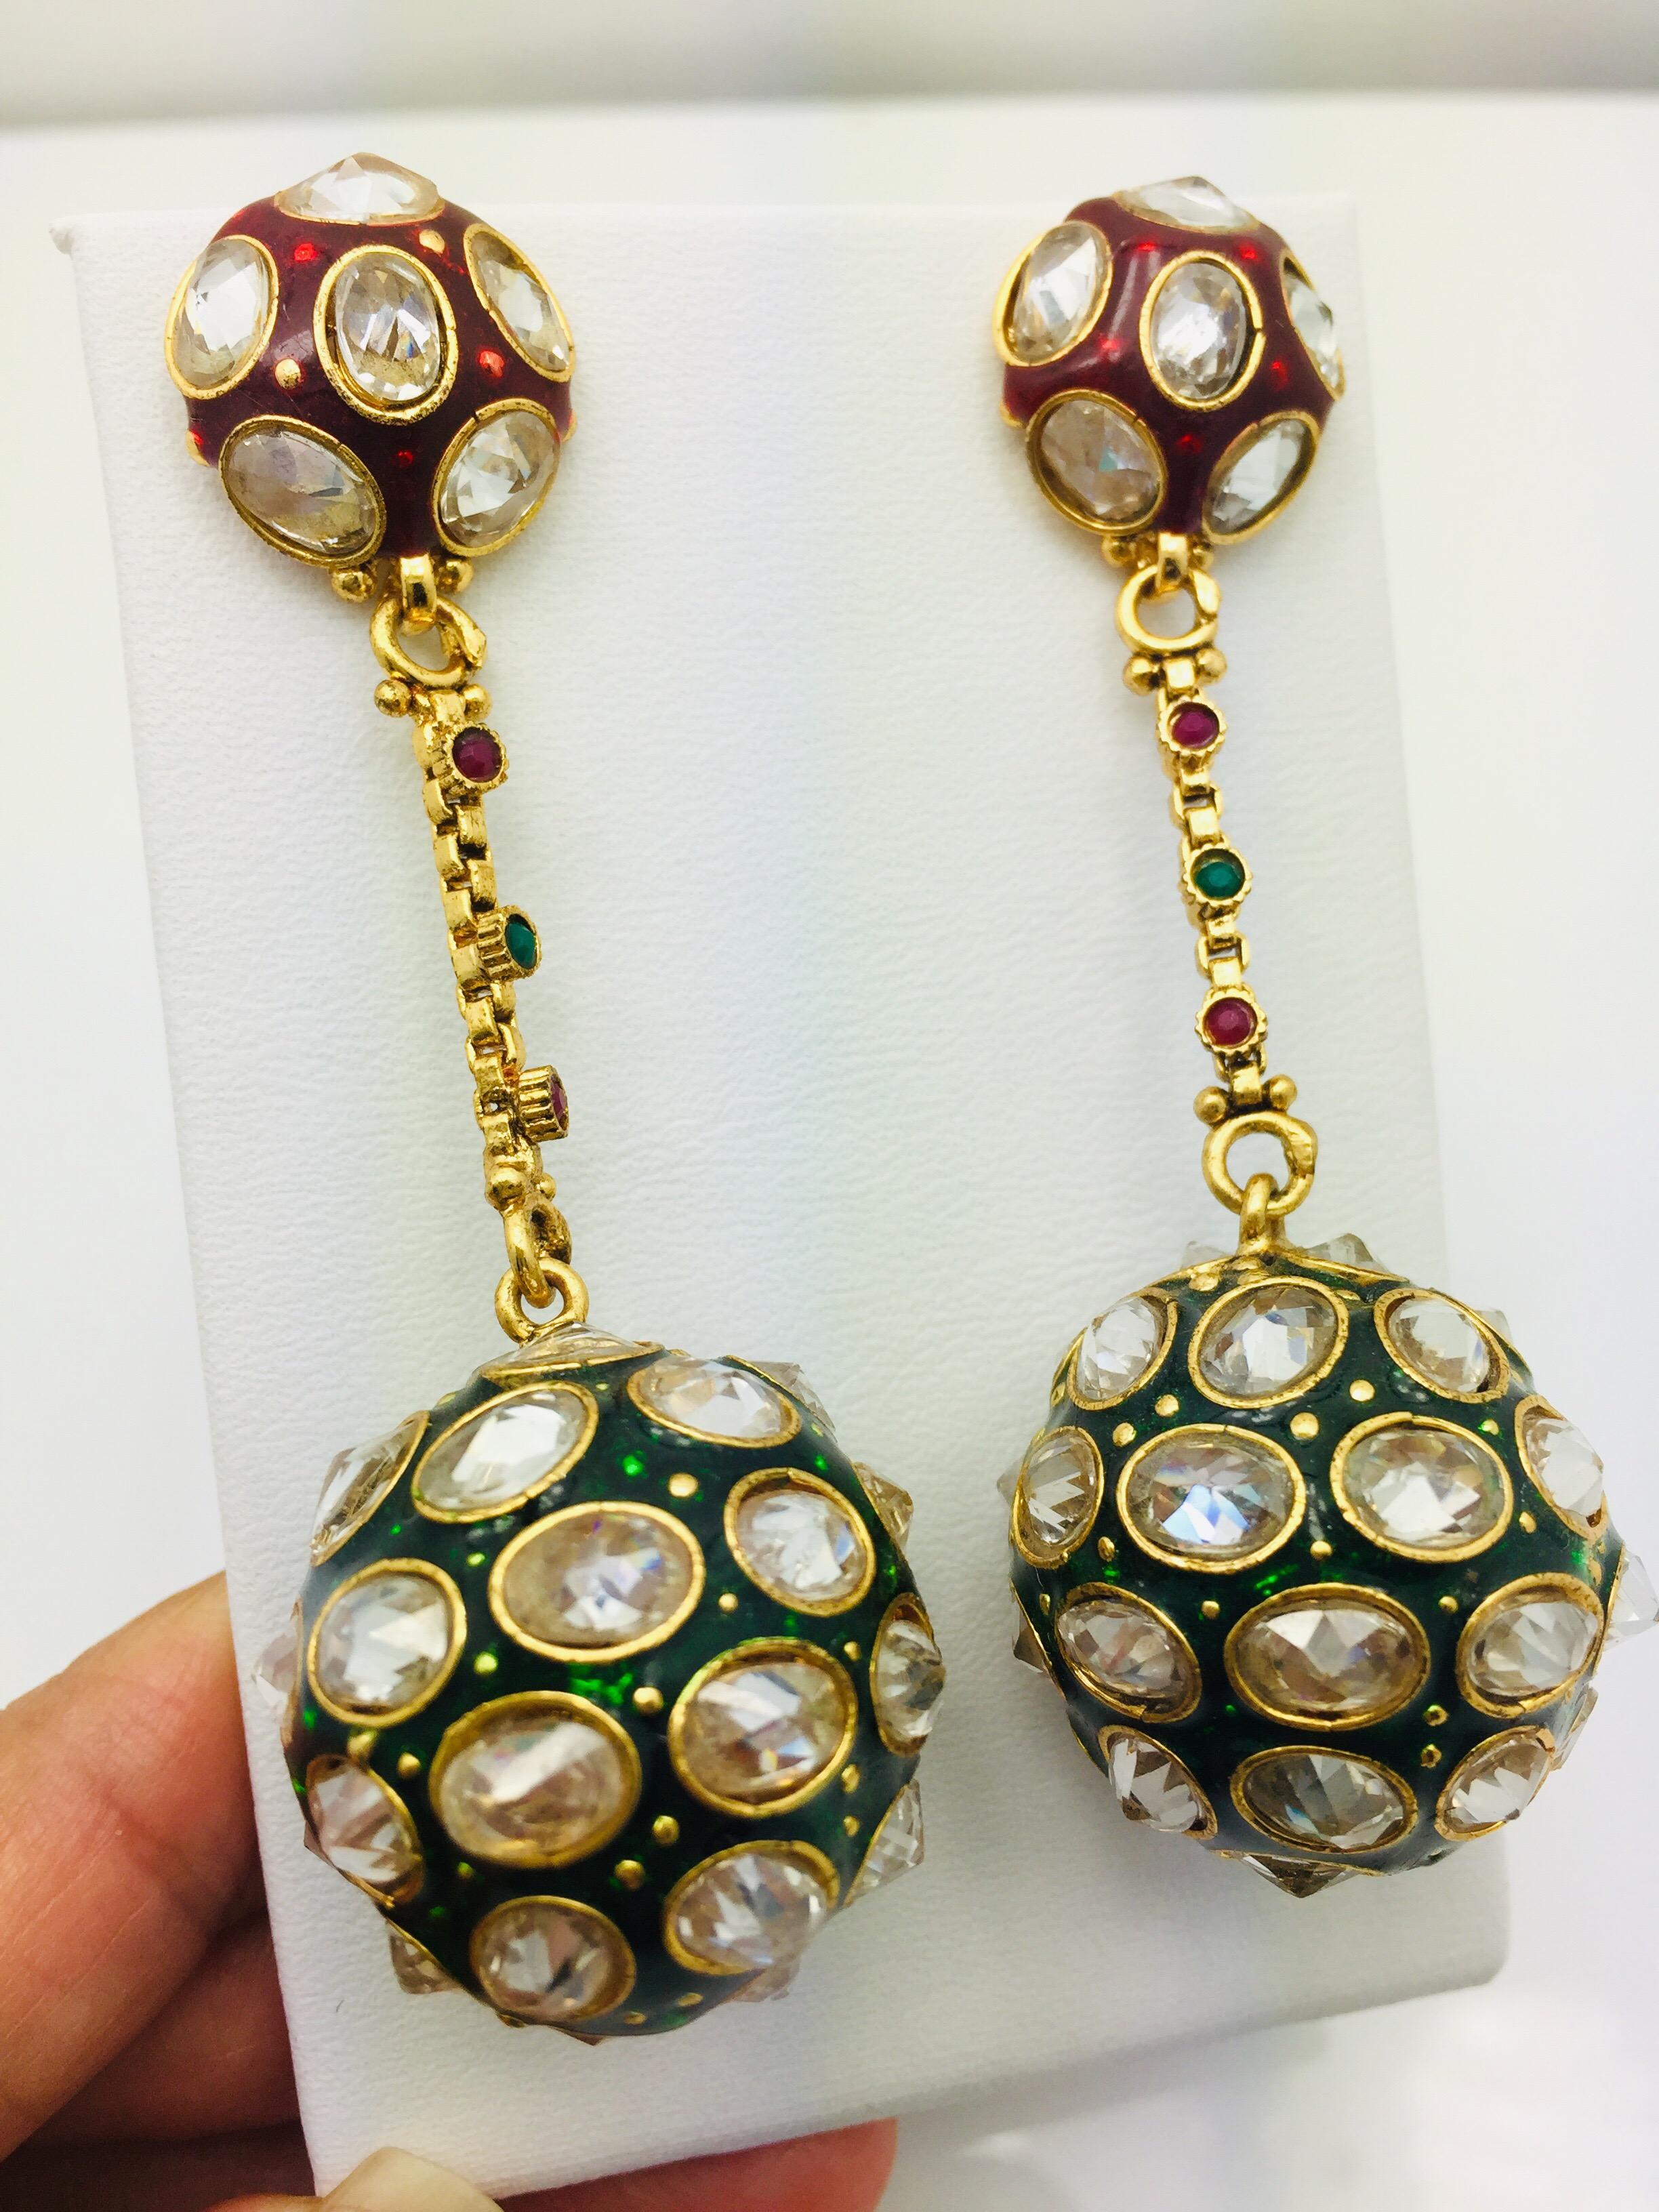 This Enamel Crystal Sphere Earrings offers an easy way to to tap the trend. They're made with a bubble-like stud that secures with a post-back fastening, and embellished with glass crystals and a sphere drop. Let them swing over a dress for a night